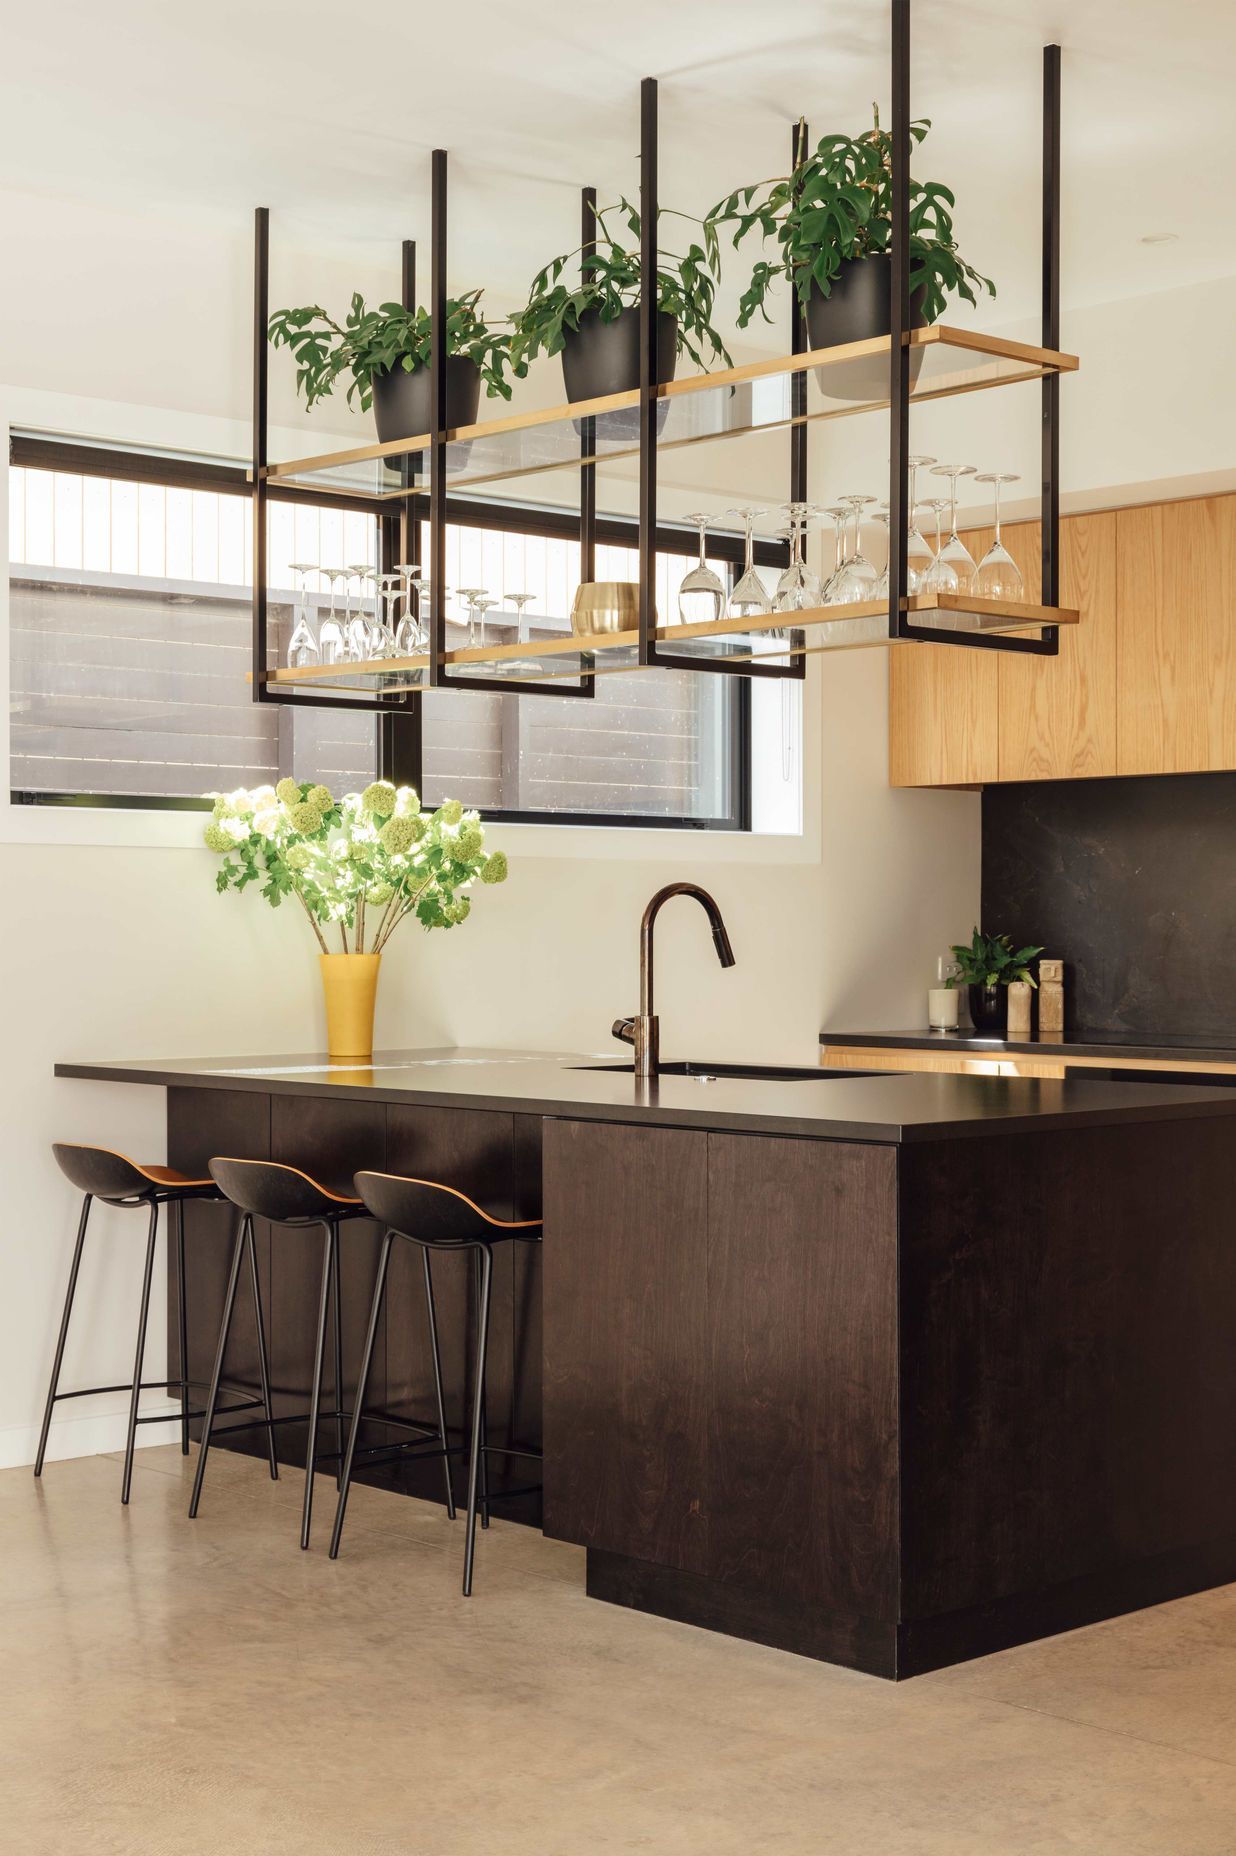 Suspended shelving above the island helps create a bar-like atmosphere around the kitchen.